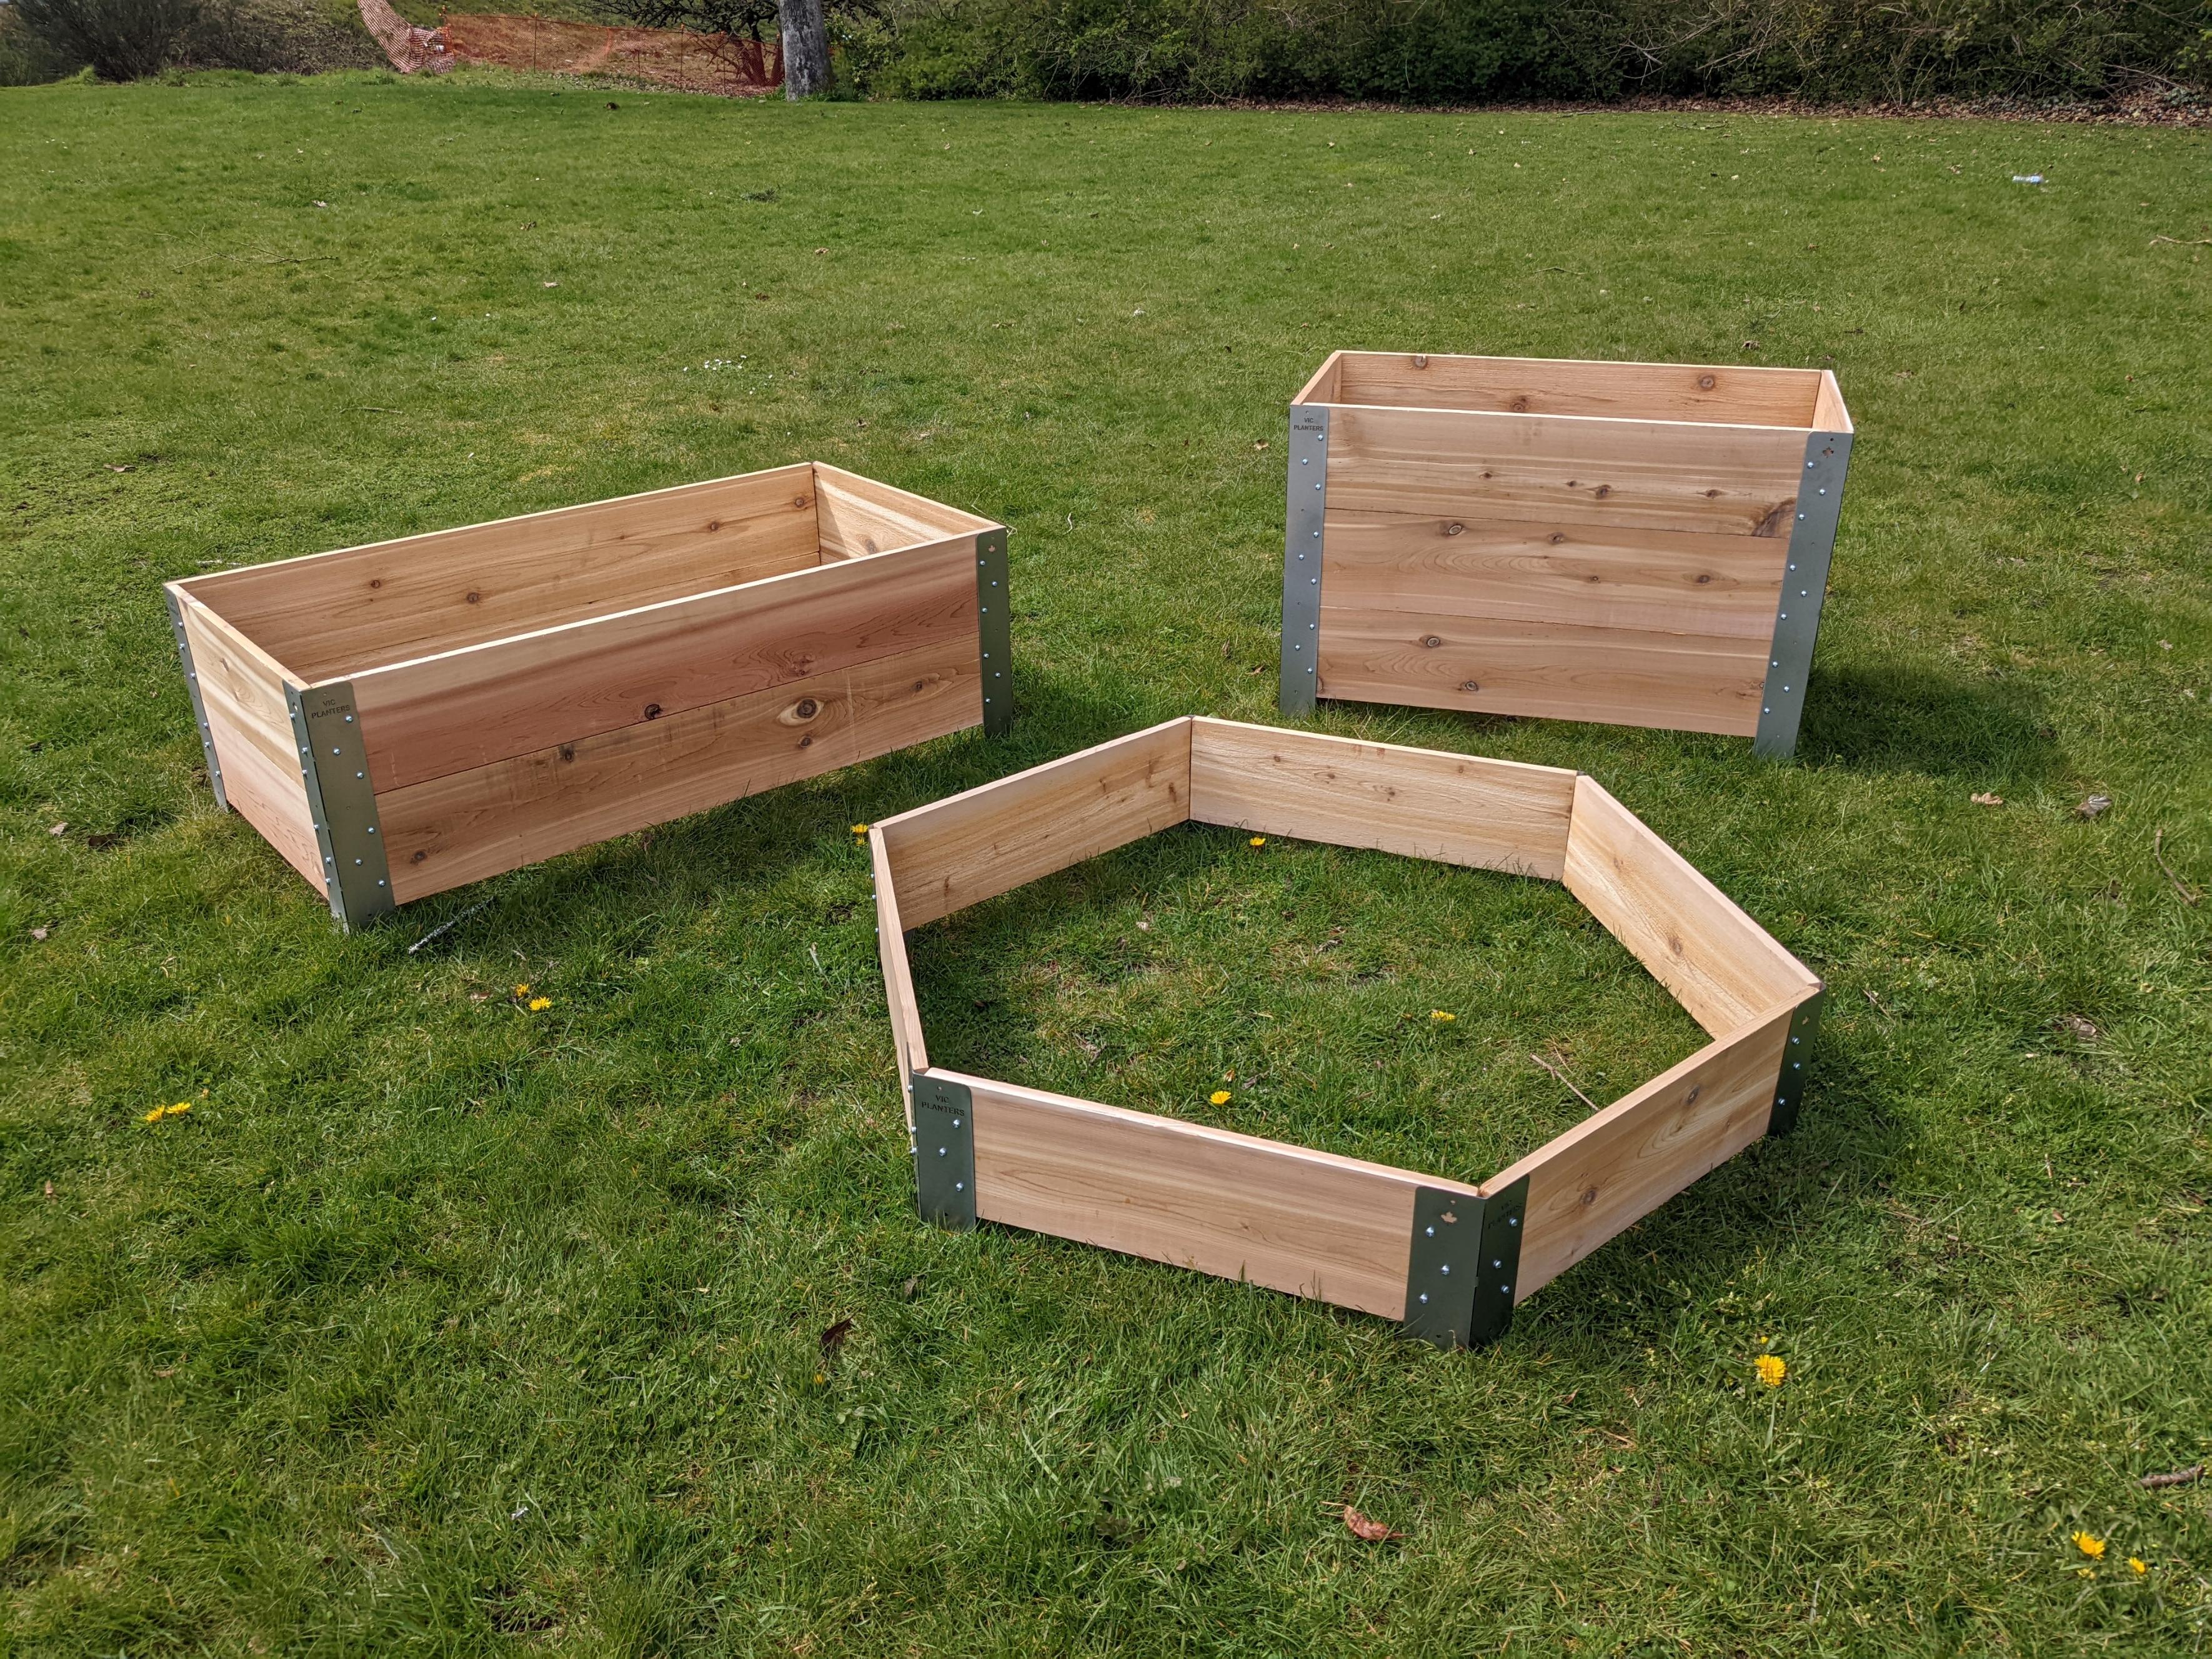 Three cedar wood planter boxes on a grass yard. In the back right is a tall rectangular box about two feet tall by three feet wide. In the back left is a short box about one foot tall and three feet wide. In front is a hexagon-shaped planter box. 